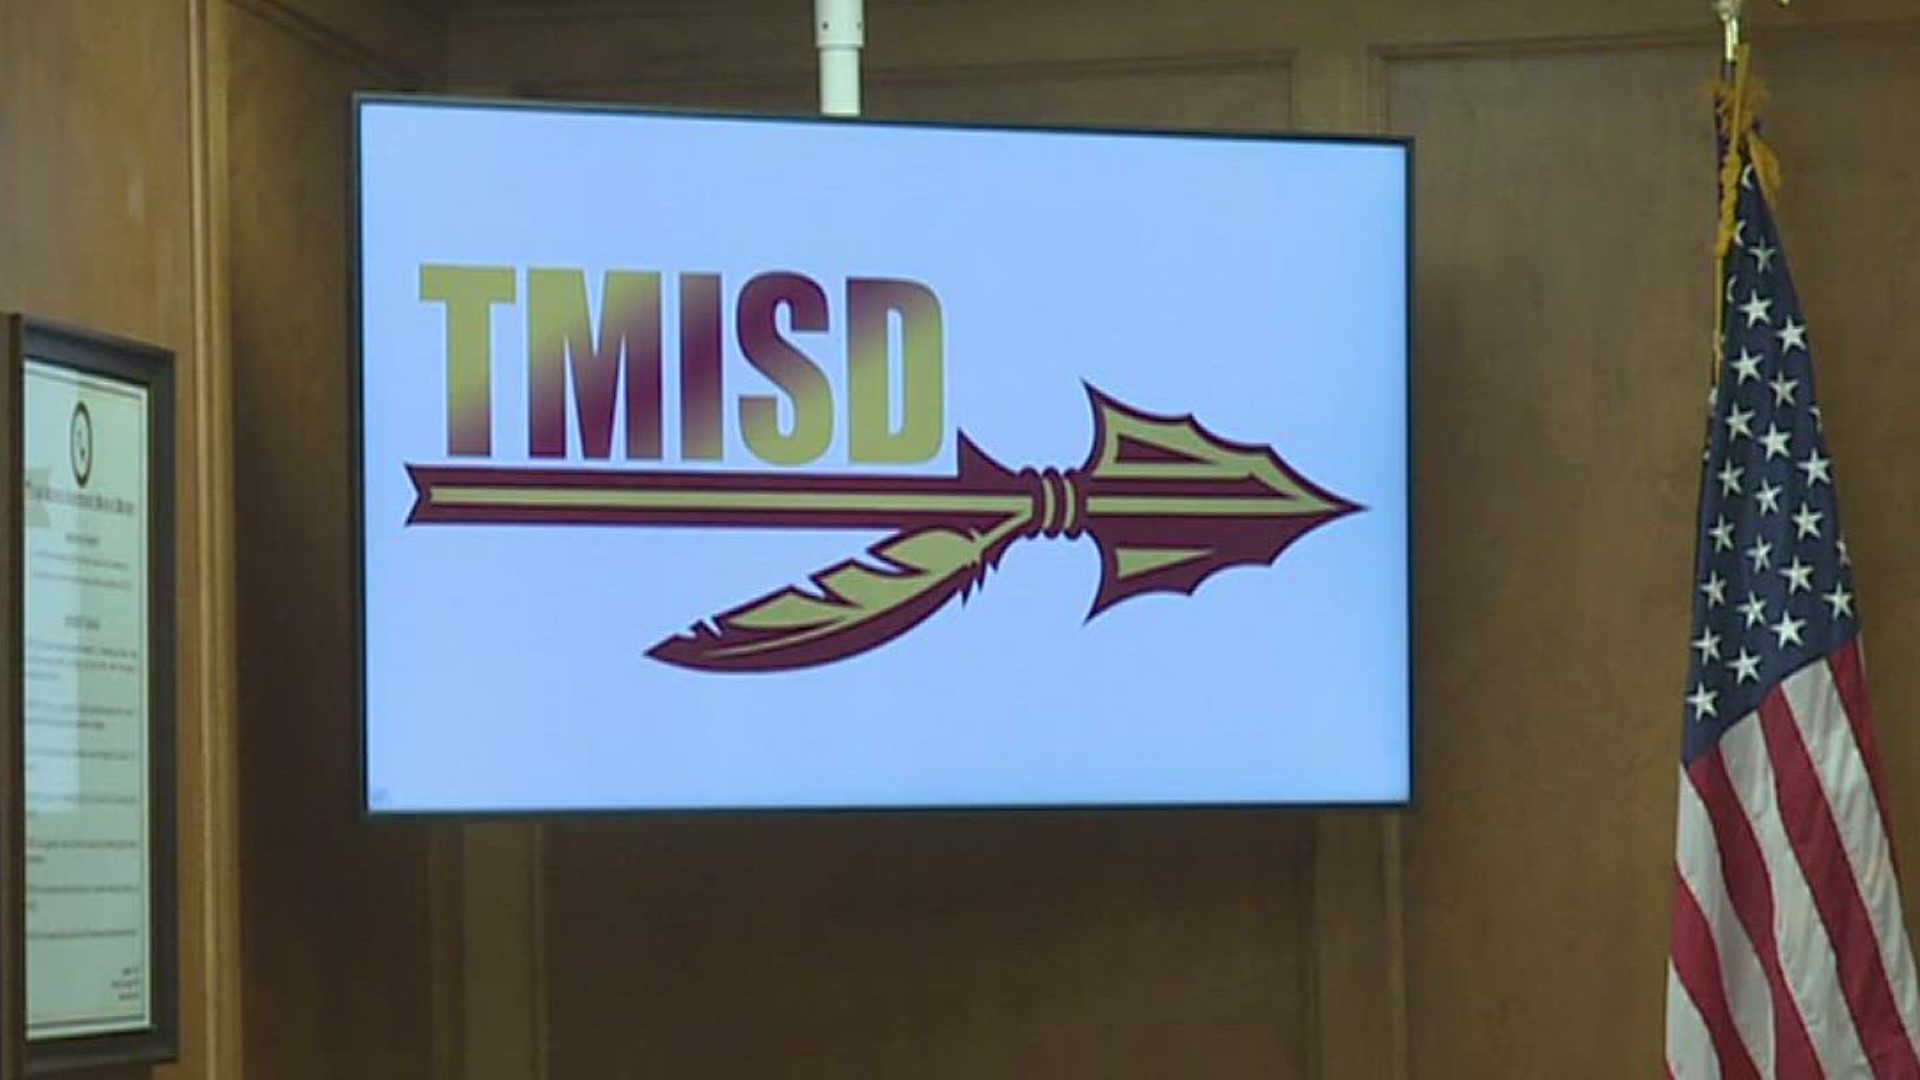 Today is the first day of school for thousands of Tuloso-Midway ISD students and teachers!